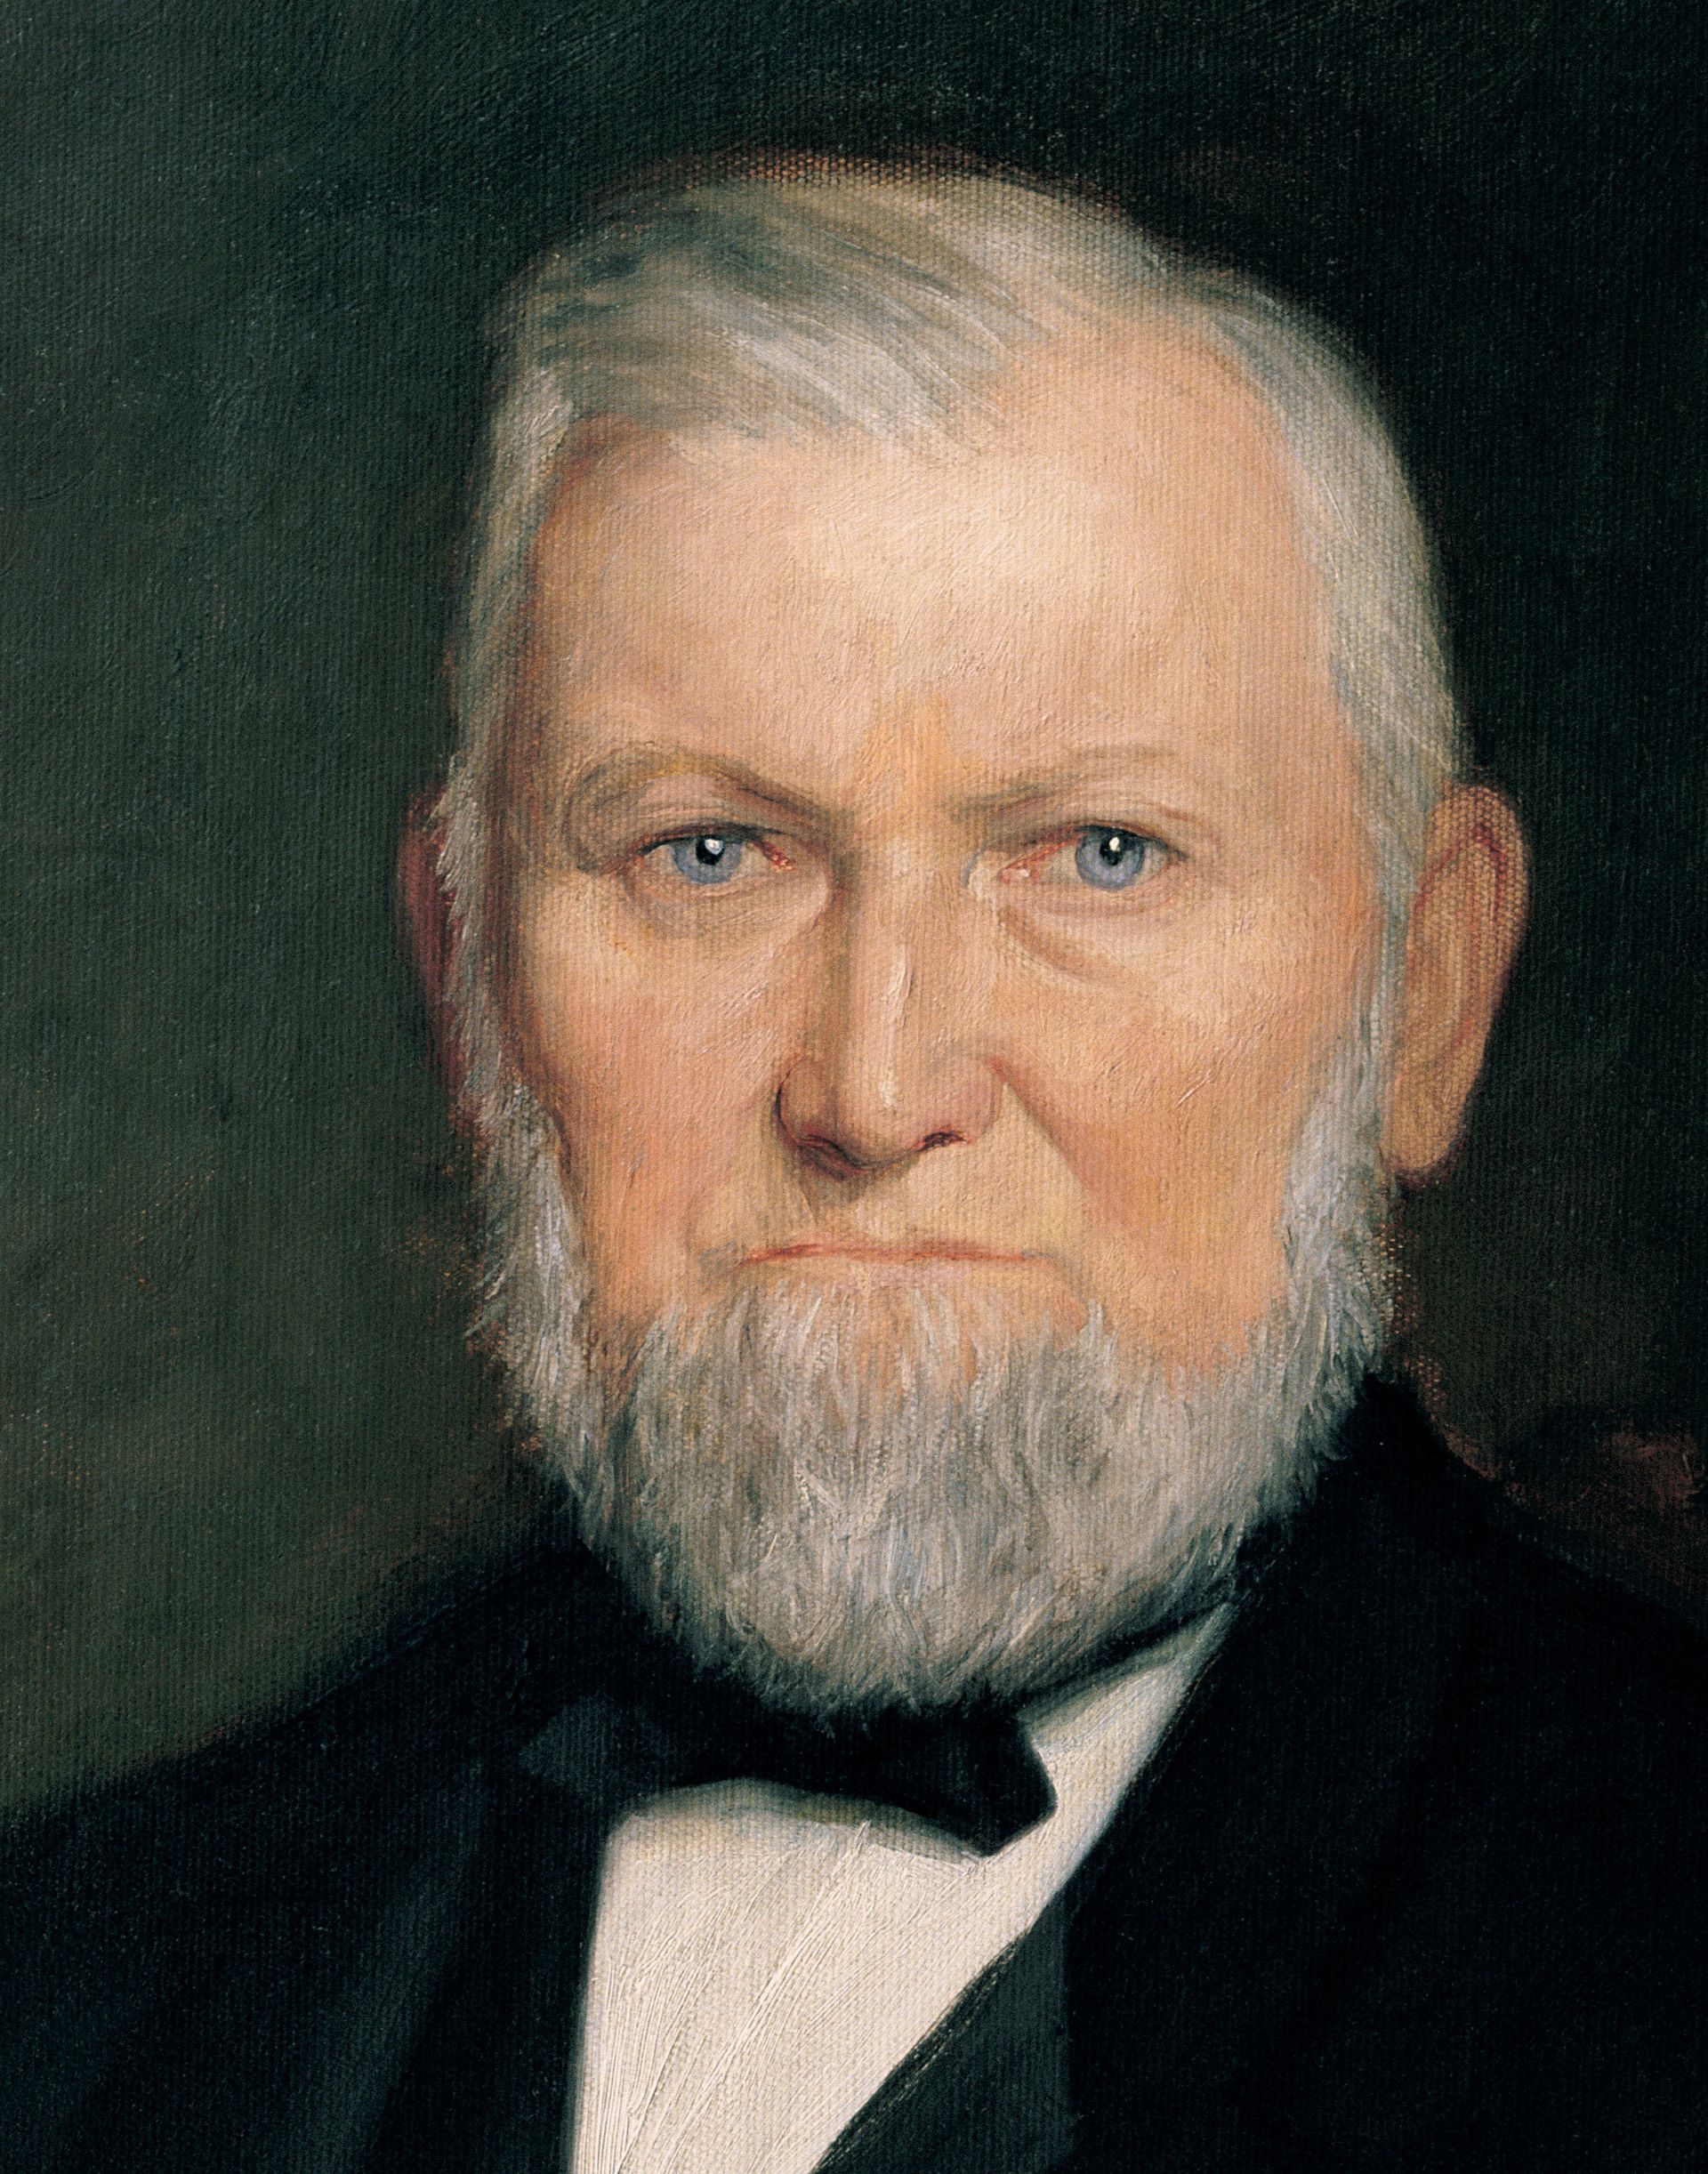 Wilford Woodruff, by H. E. Peterson; GAK 509; Our Heritage, 98–102. President Wilford Woodruff served as the fourth President of the Church from 1889 to 1898.